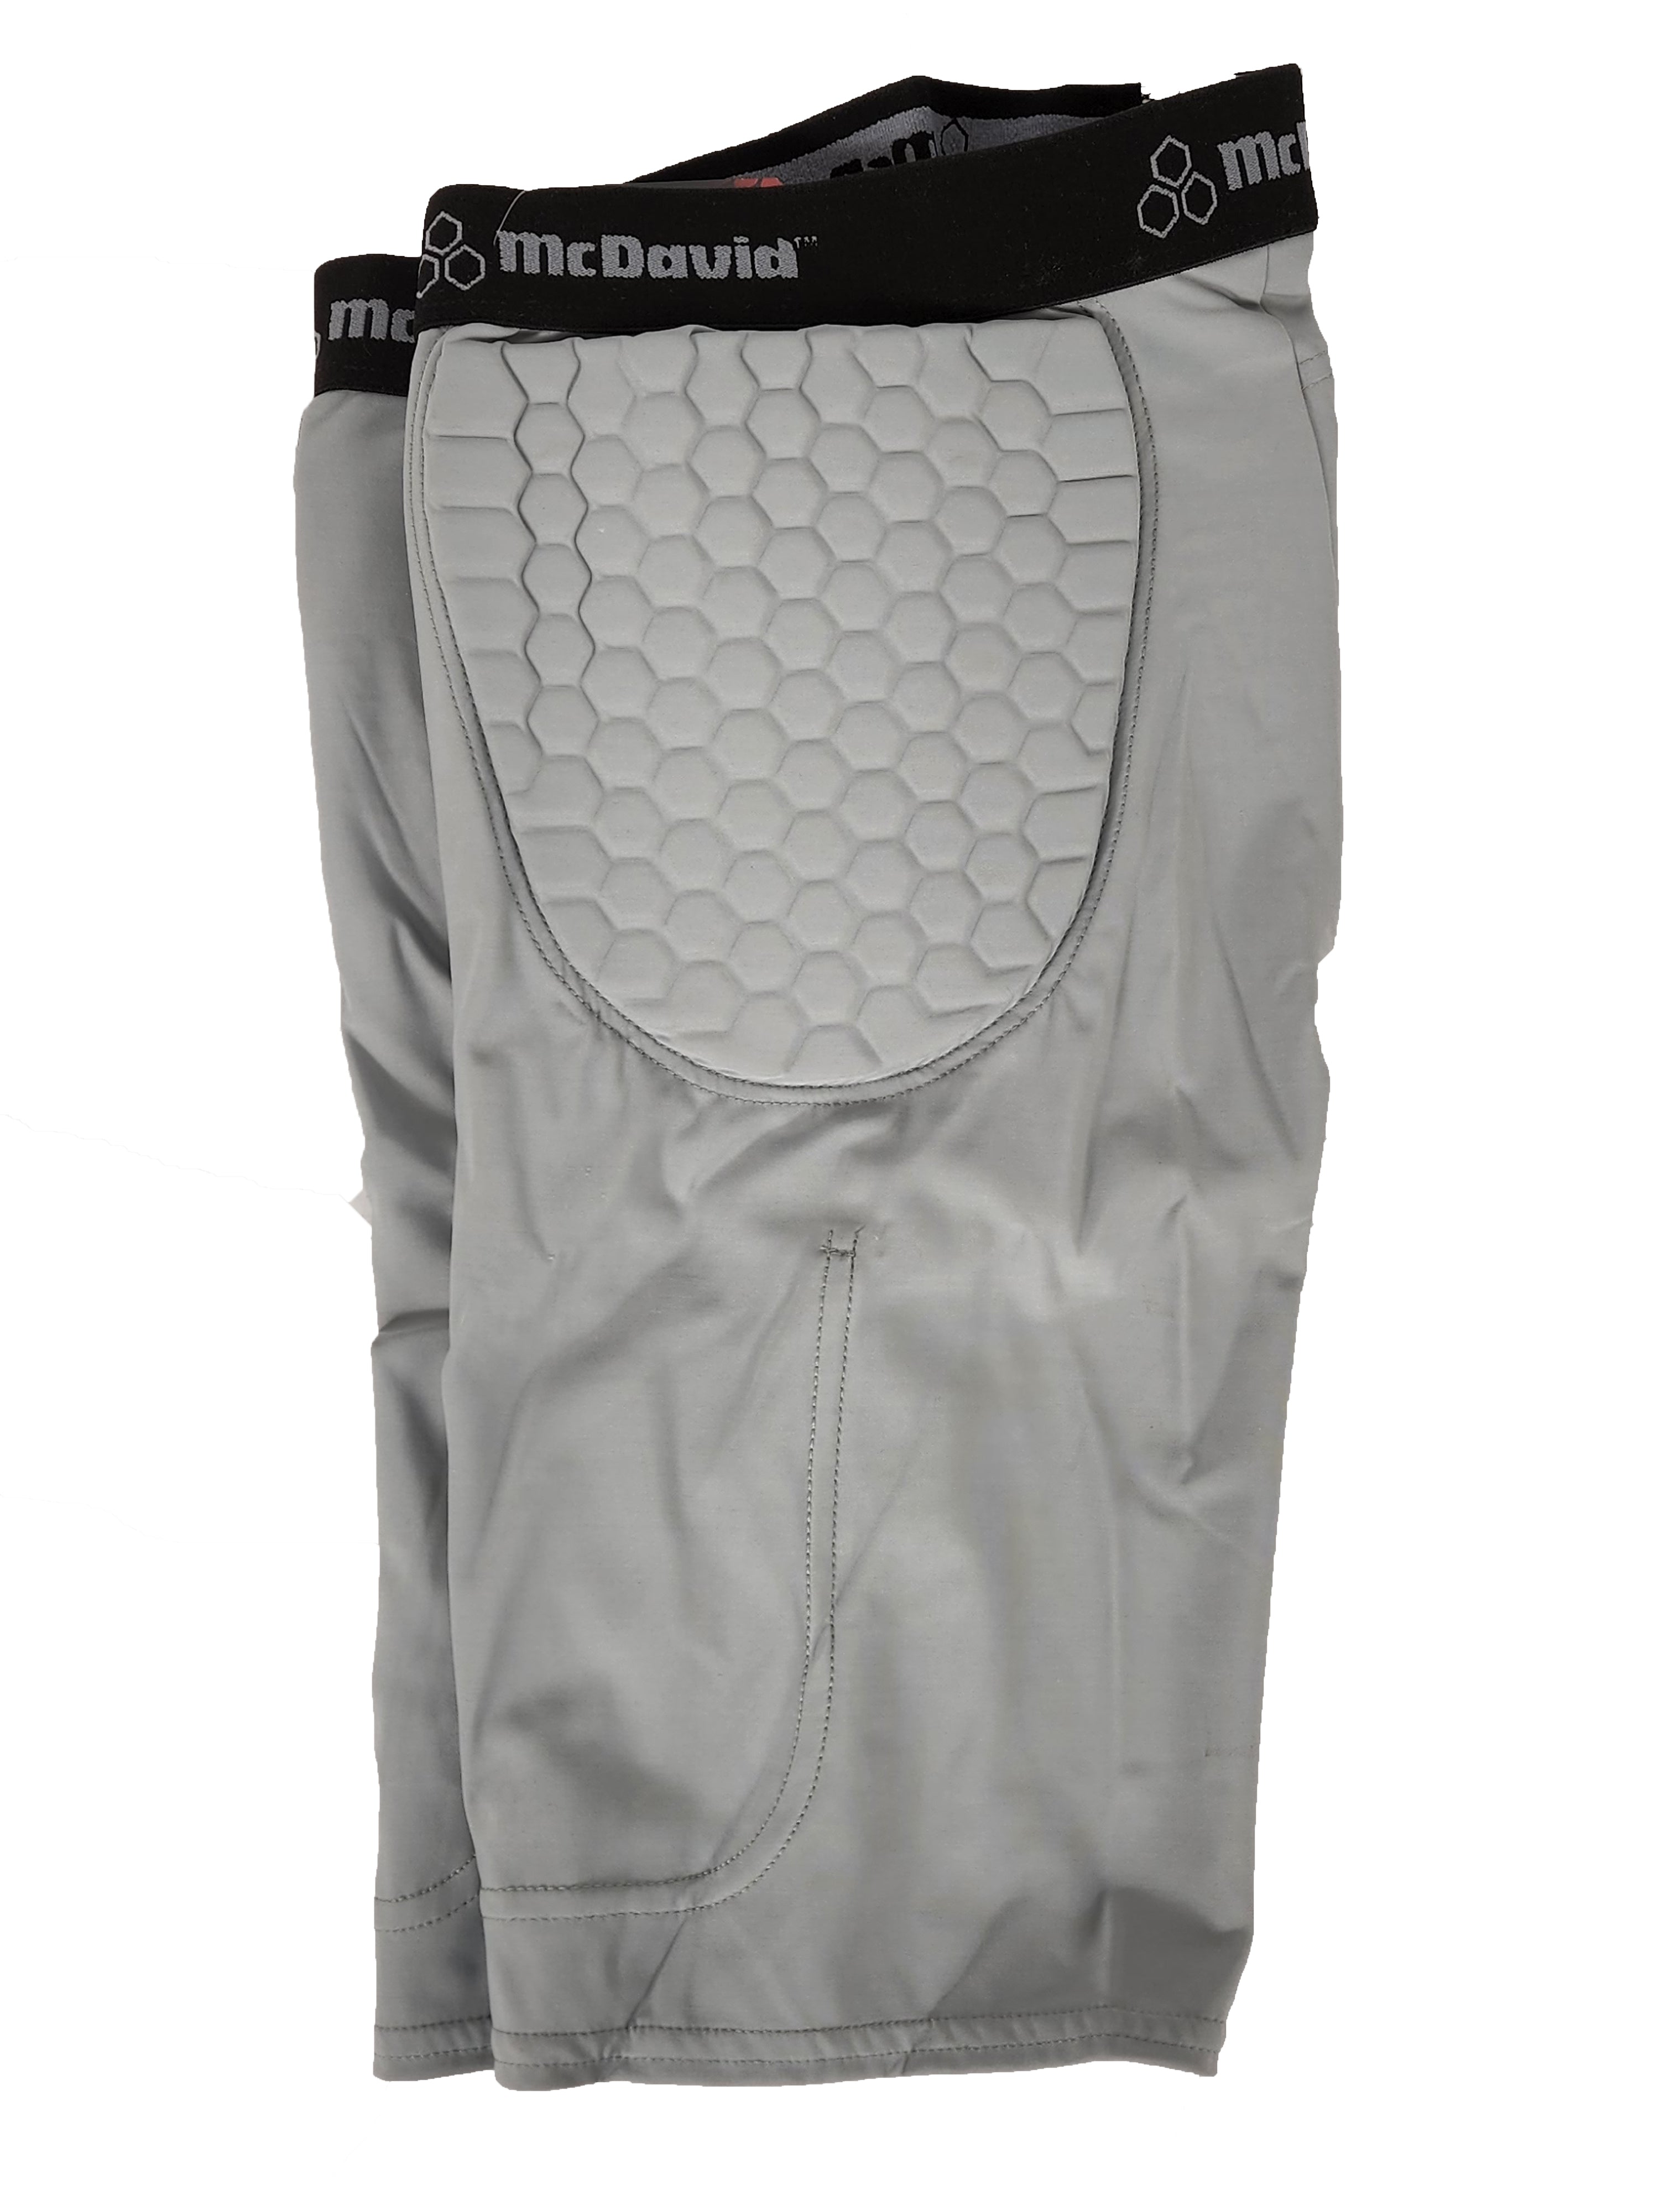 McDavid Grey 755T Pro 2-Pocket Football Girdle with Hex Pads Size